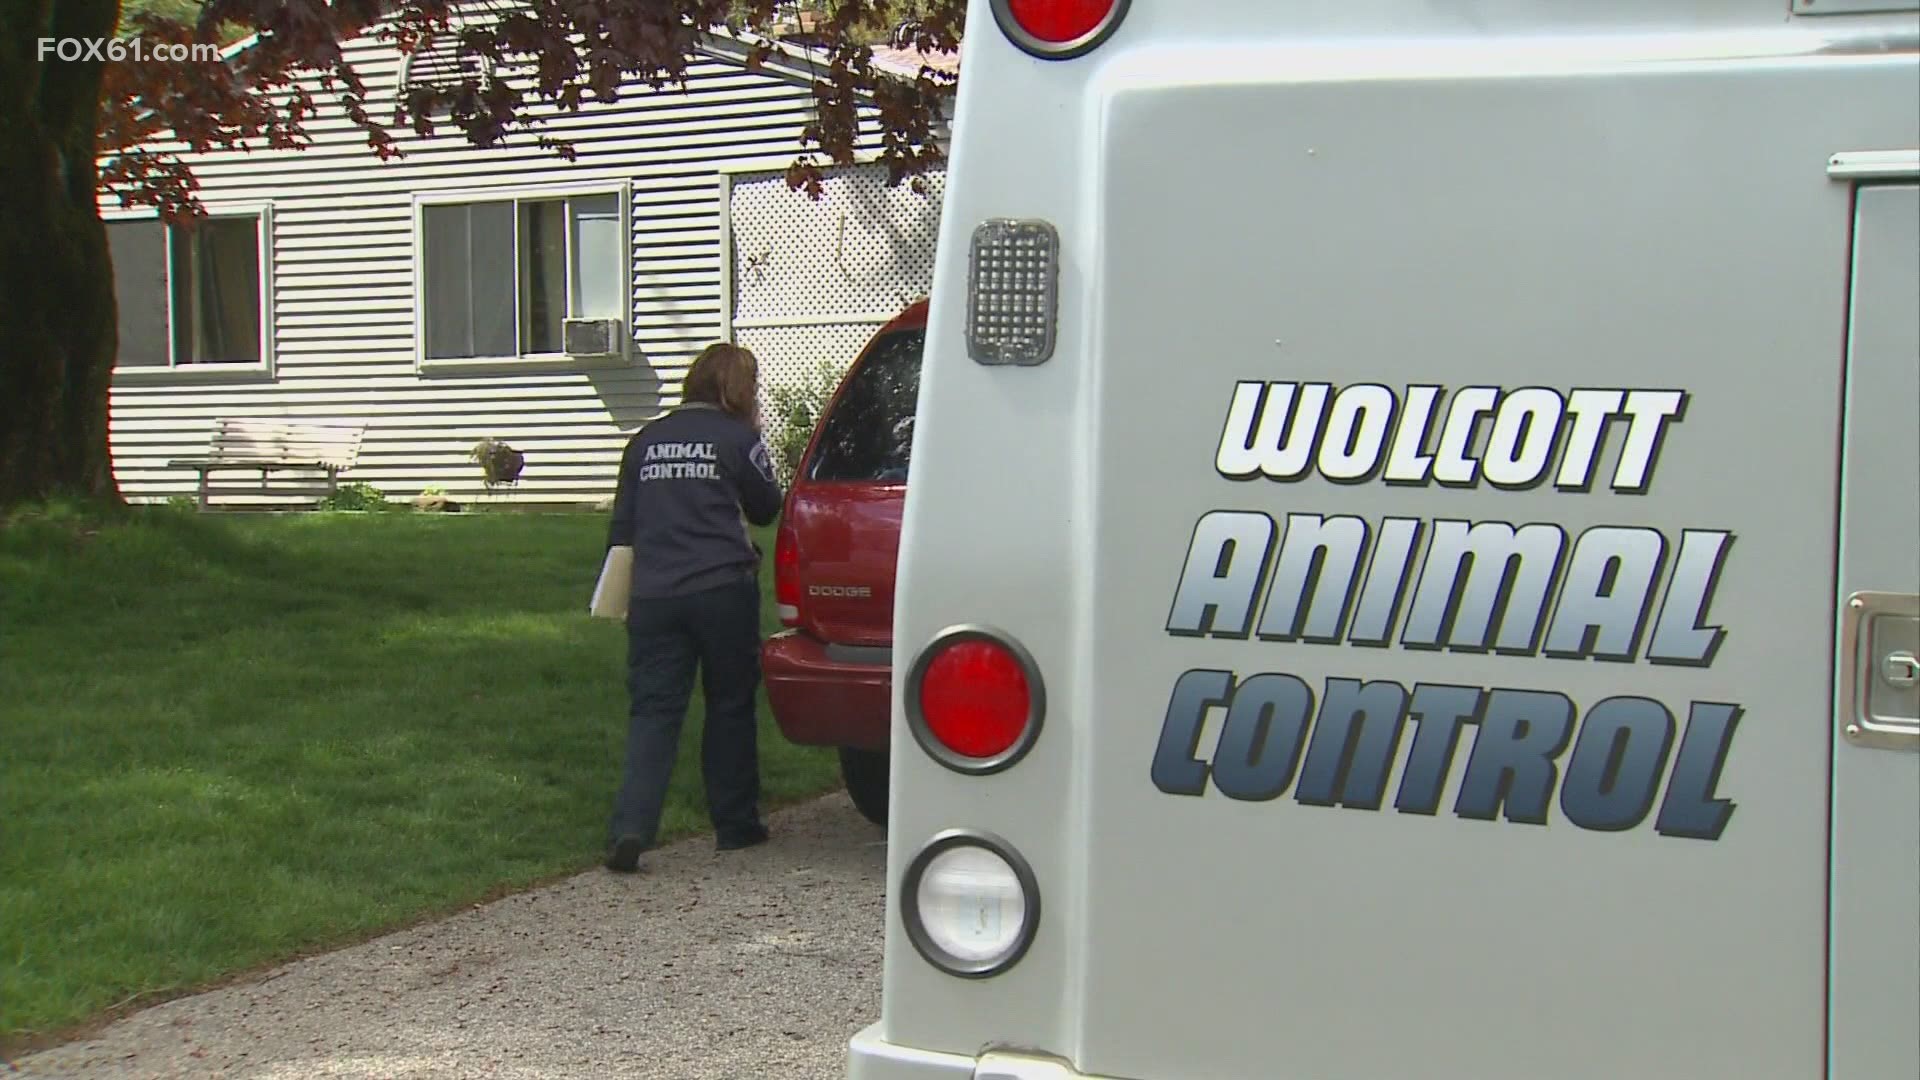 Police said 53 cats were found, 12 of which were dead, inside the home.